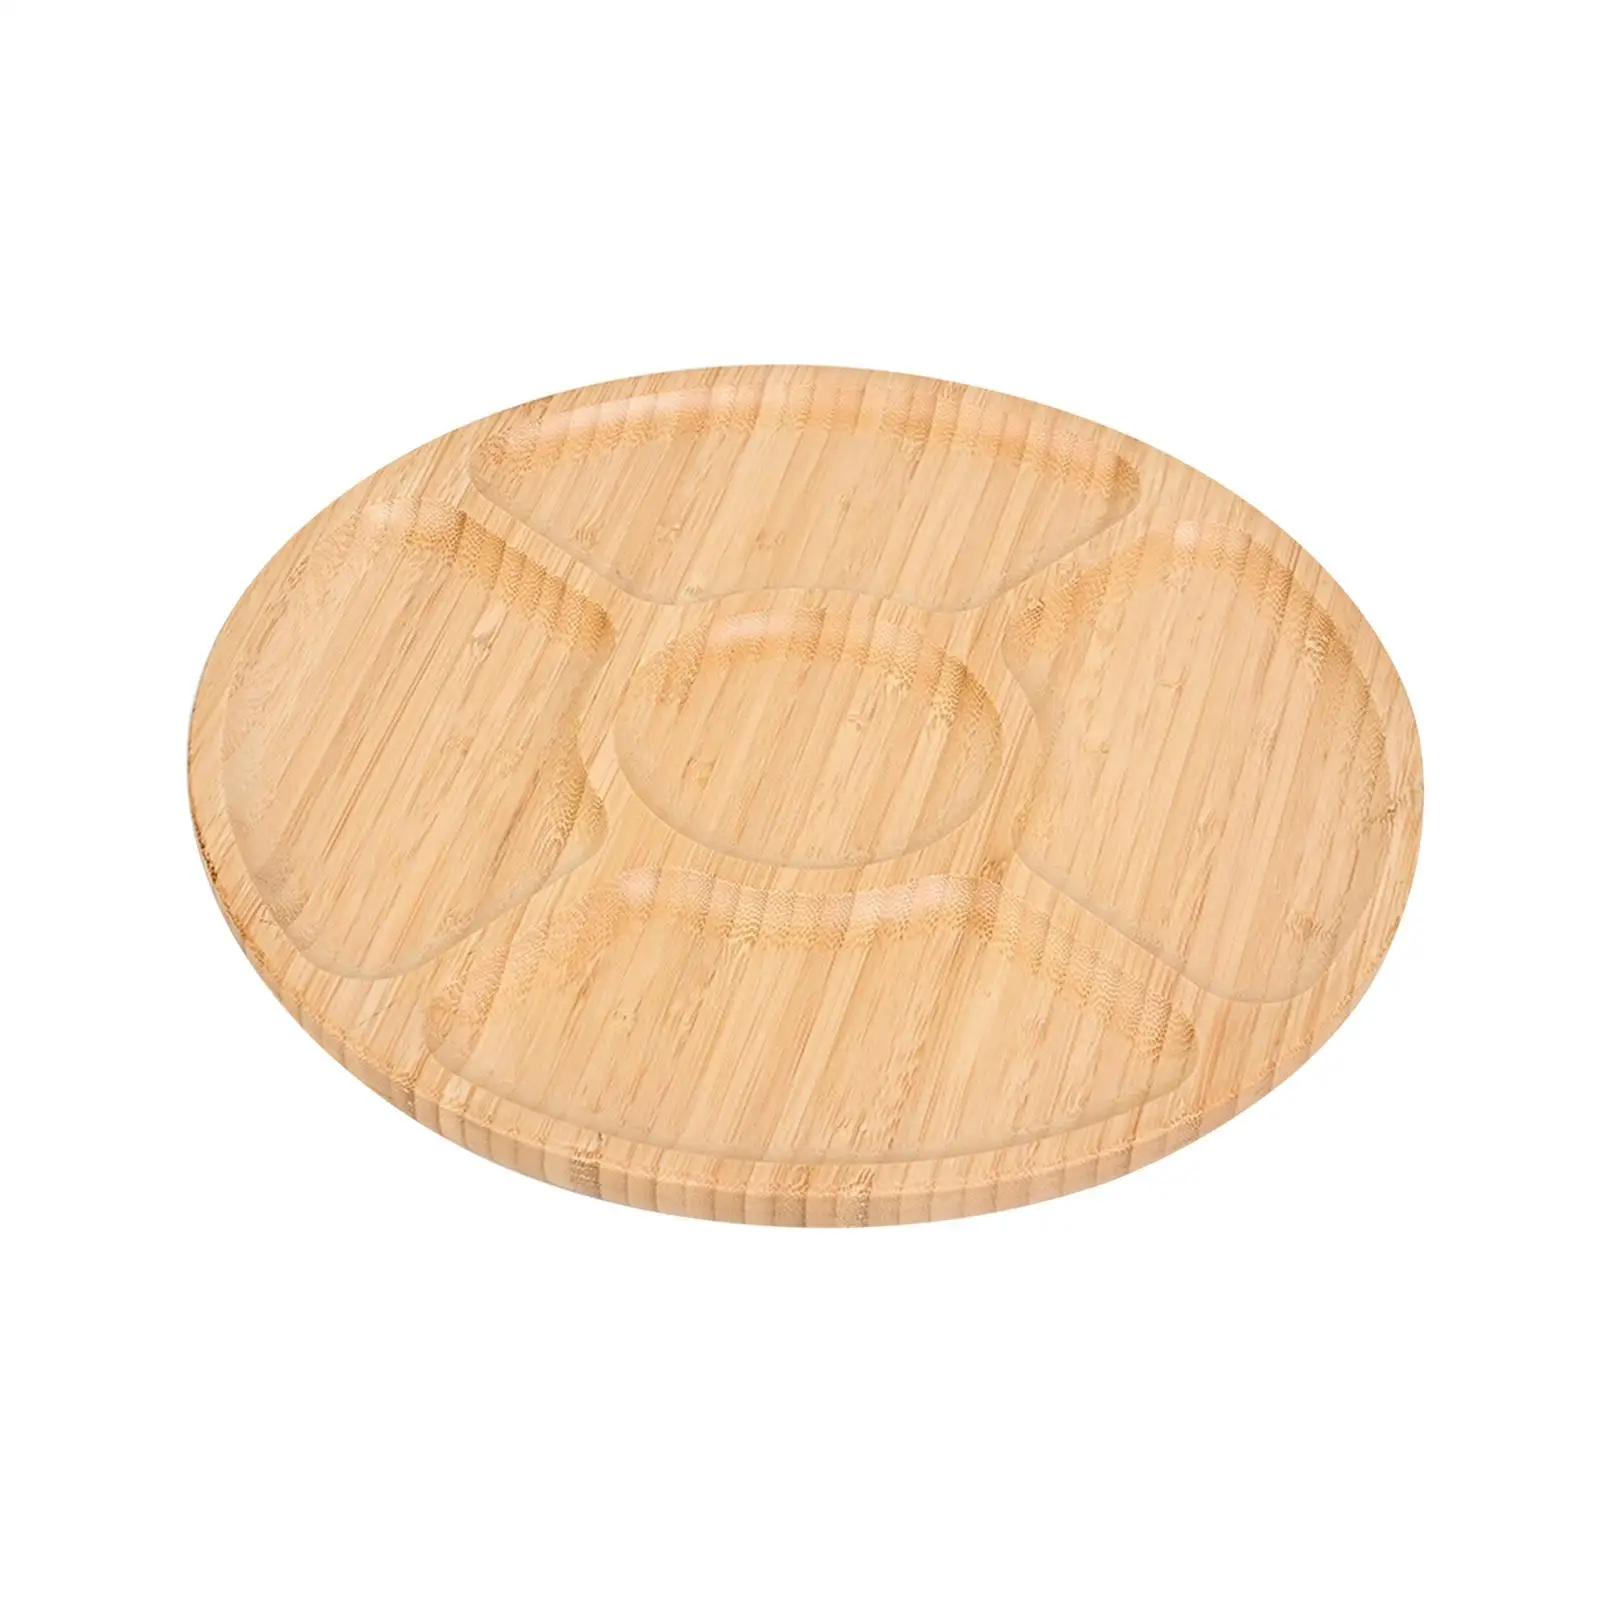 Wooden Tray Decorative Family Dinner Dessert Trays Wooden Tea Trays Round Wood Tray for Cheese Candies Dinner Vegetable